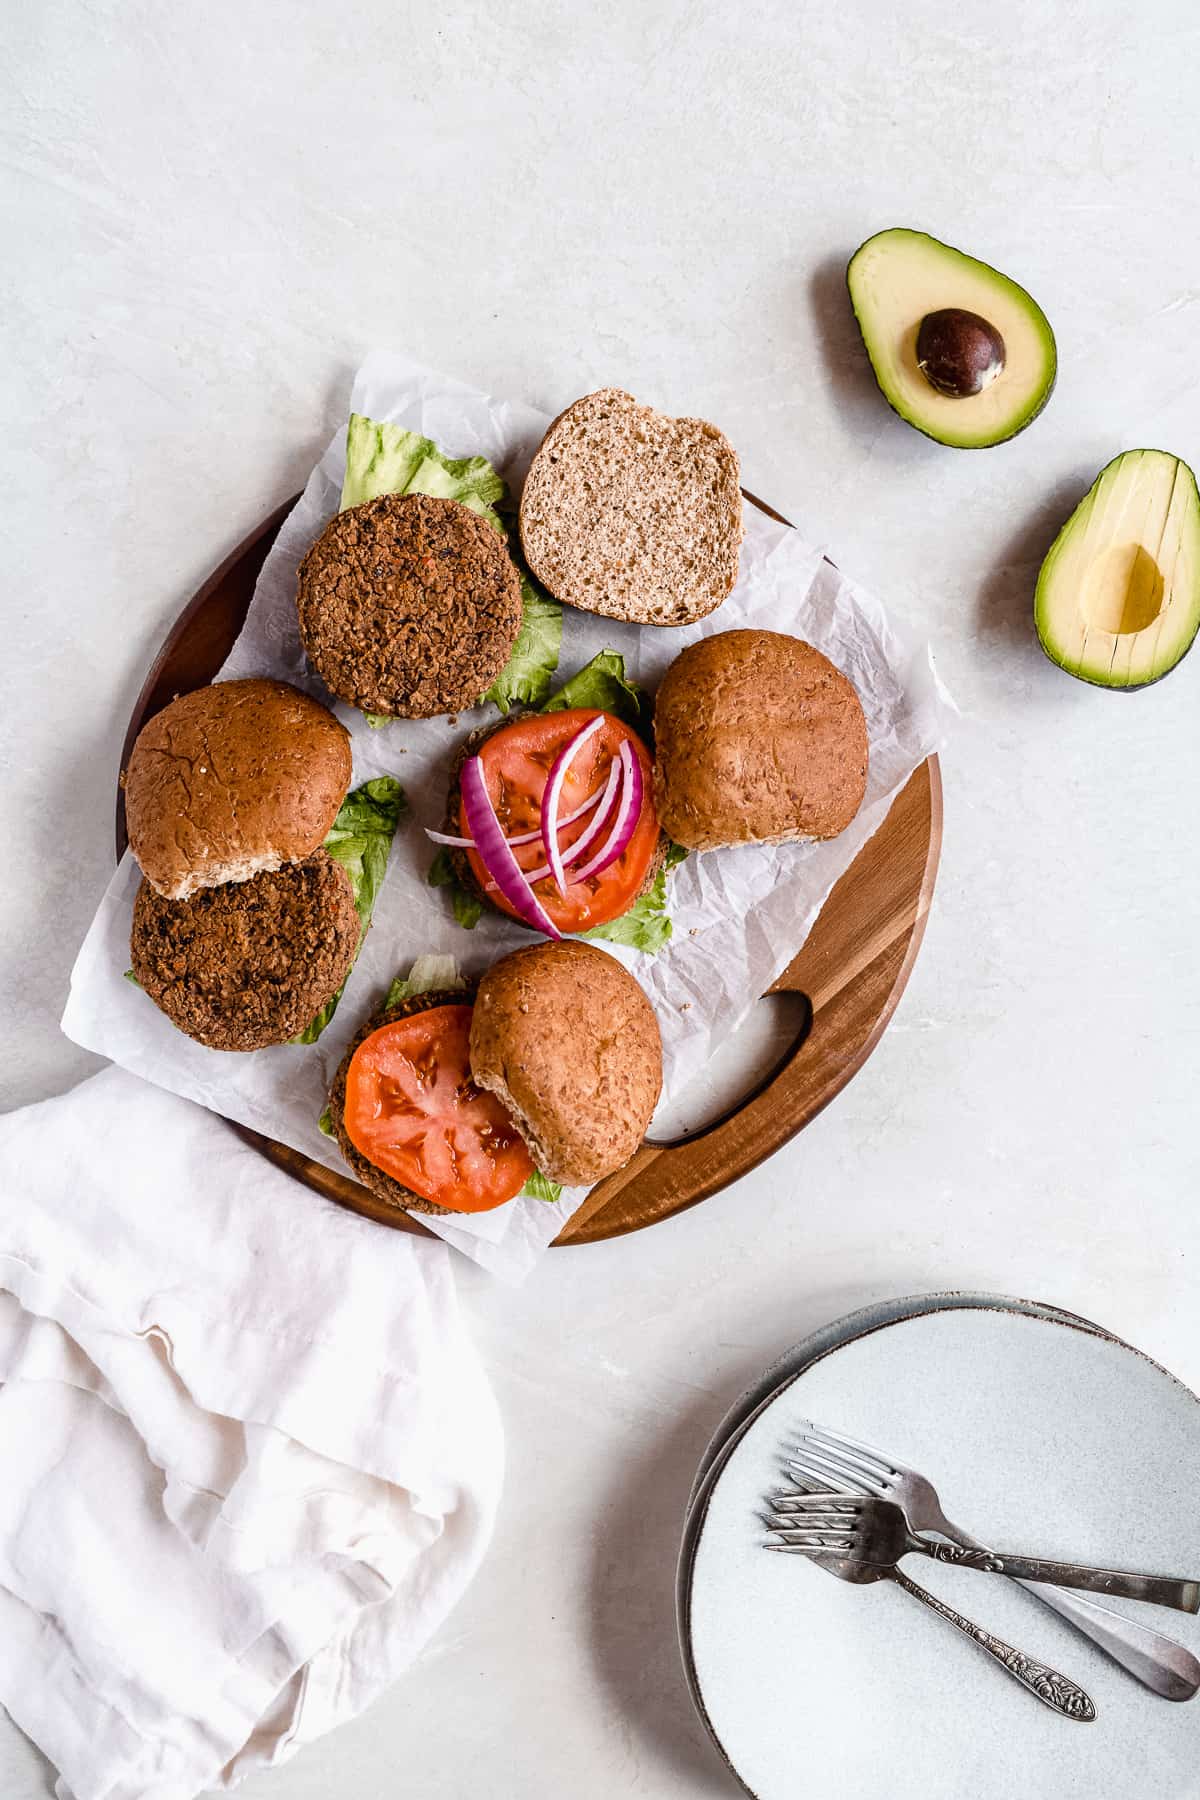 Overhead photo of the buns, tomatoes, avocados and onions arranged on parchment paper on a wooden tray in the process of being built into sandwiches.  